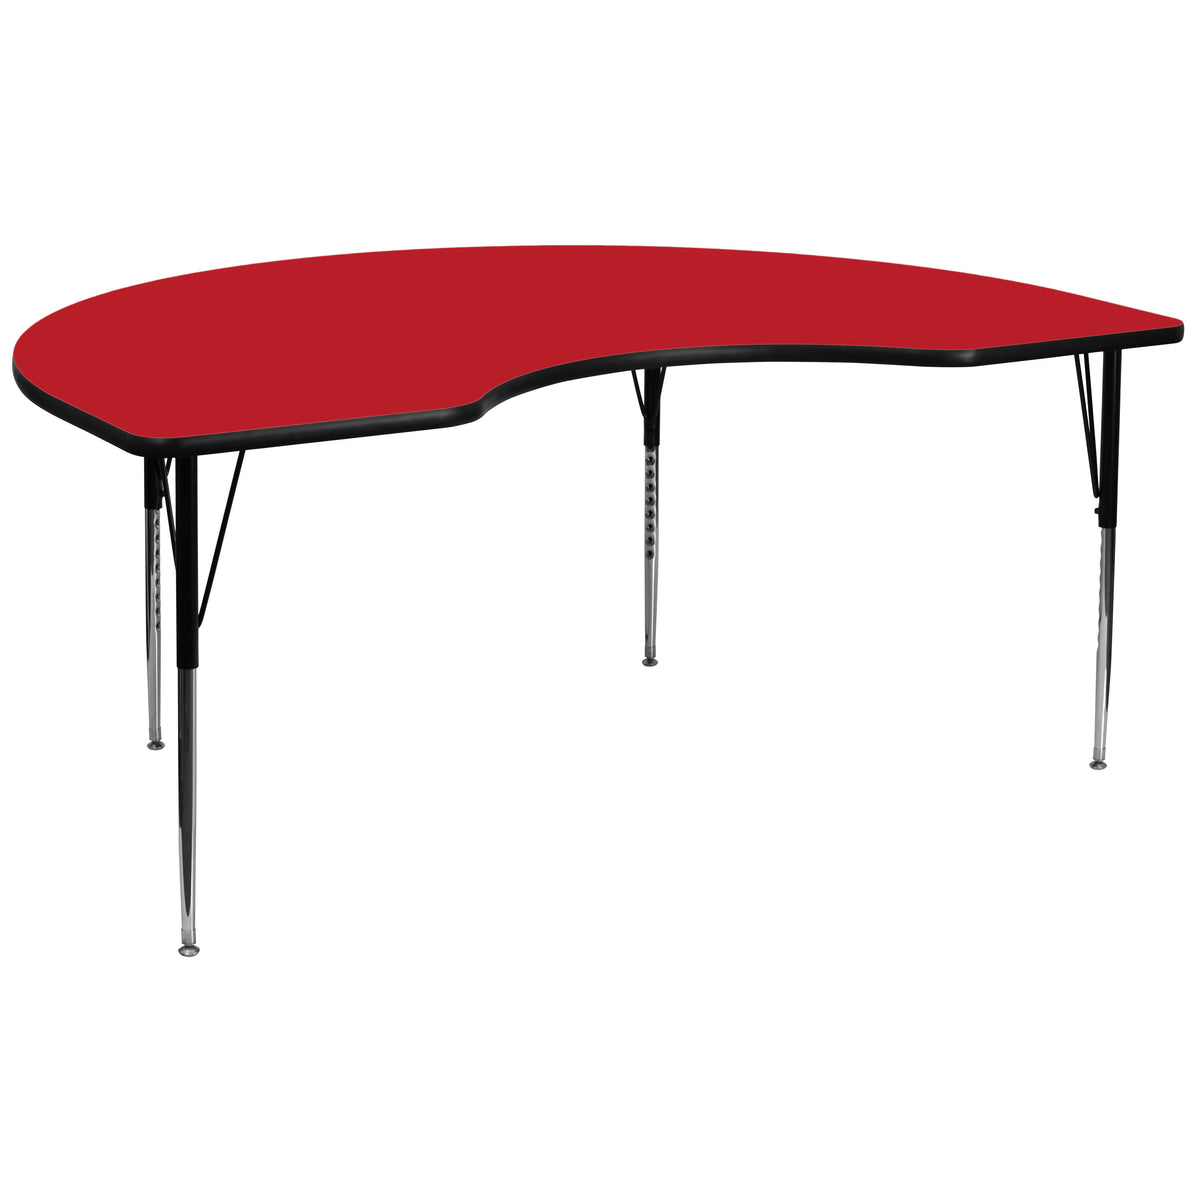 Red |#| 48inchW x 96inchL Kidney Red HP Laminate Activity Table - Height Adjustable Legs